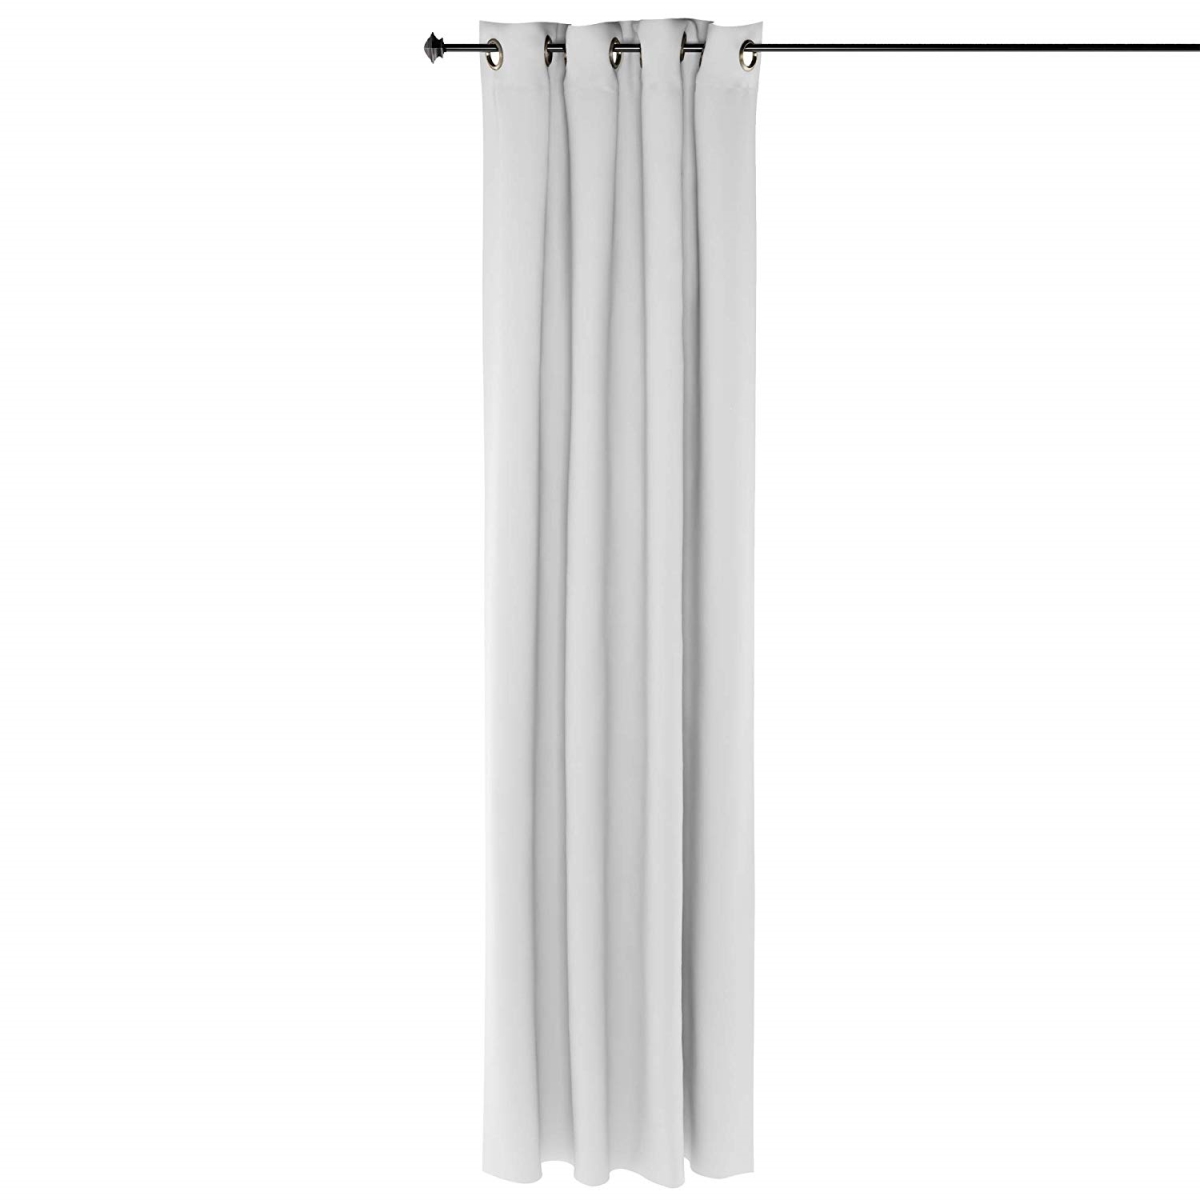 Fc66005wh Collins Blackout Curtain, 52 X 95 In. - 1 Panel - White